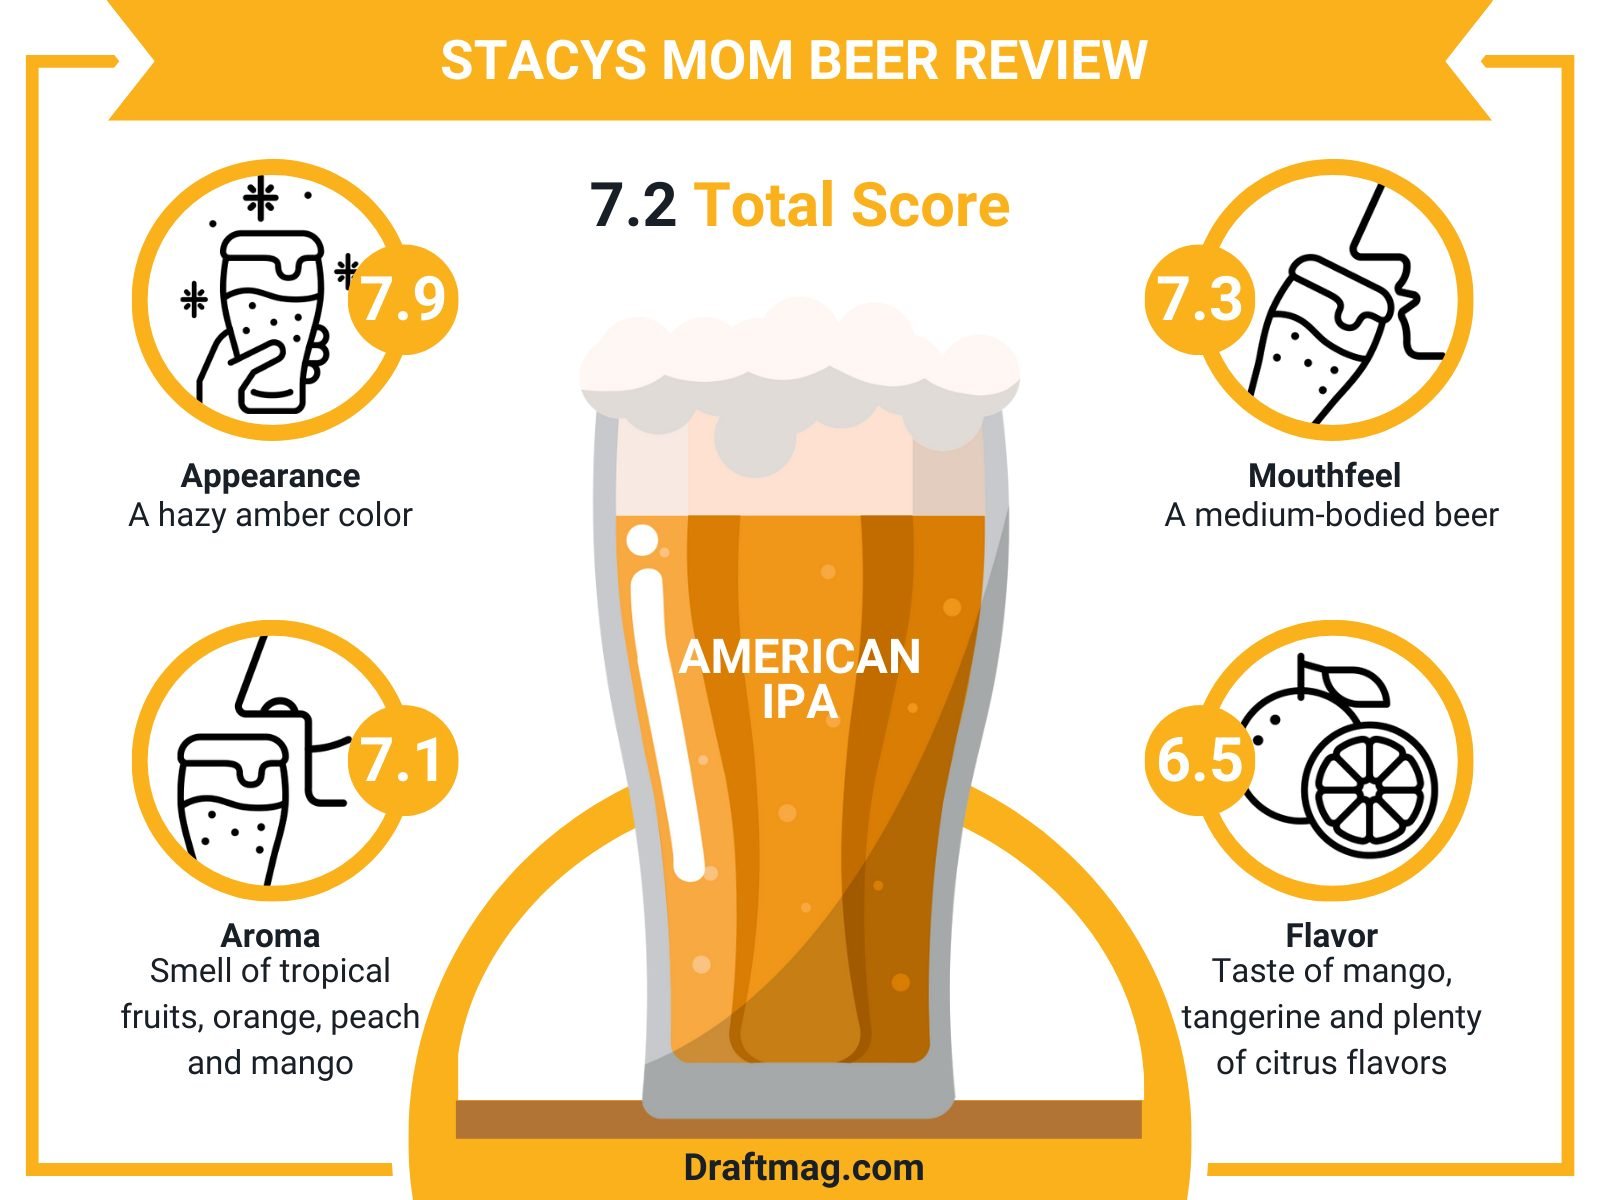 Stacys Mom Beer Review Infographic